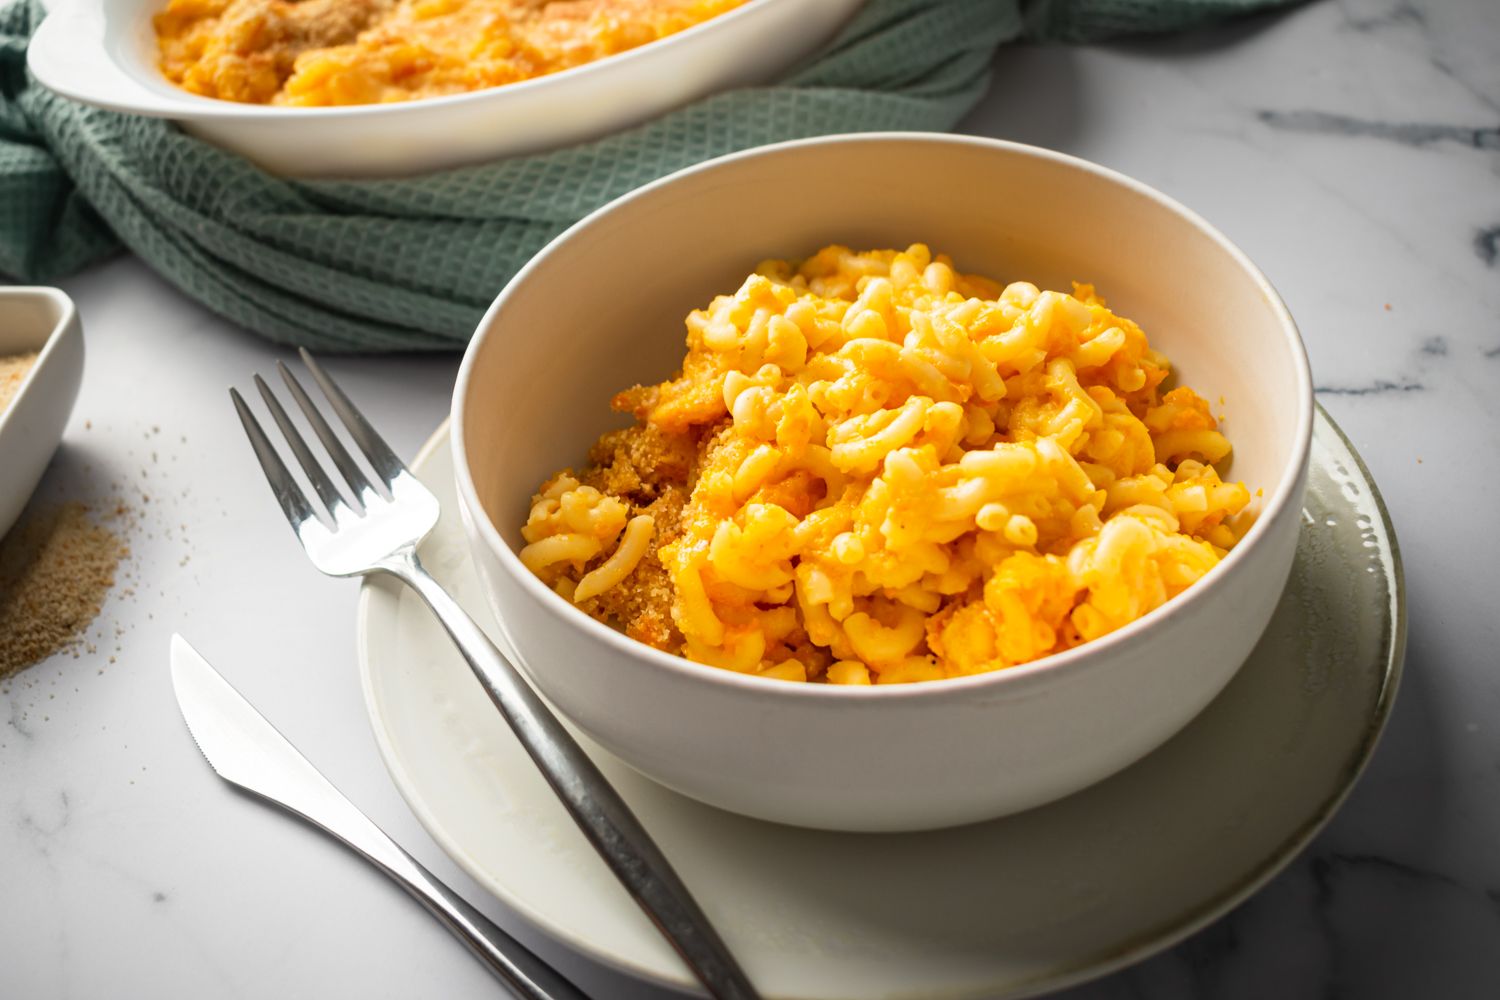 Vegetable macaroni and cheese made with carrots and cheddar cheese in a bowl with a fork and knife.